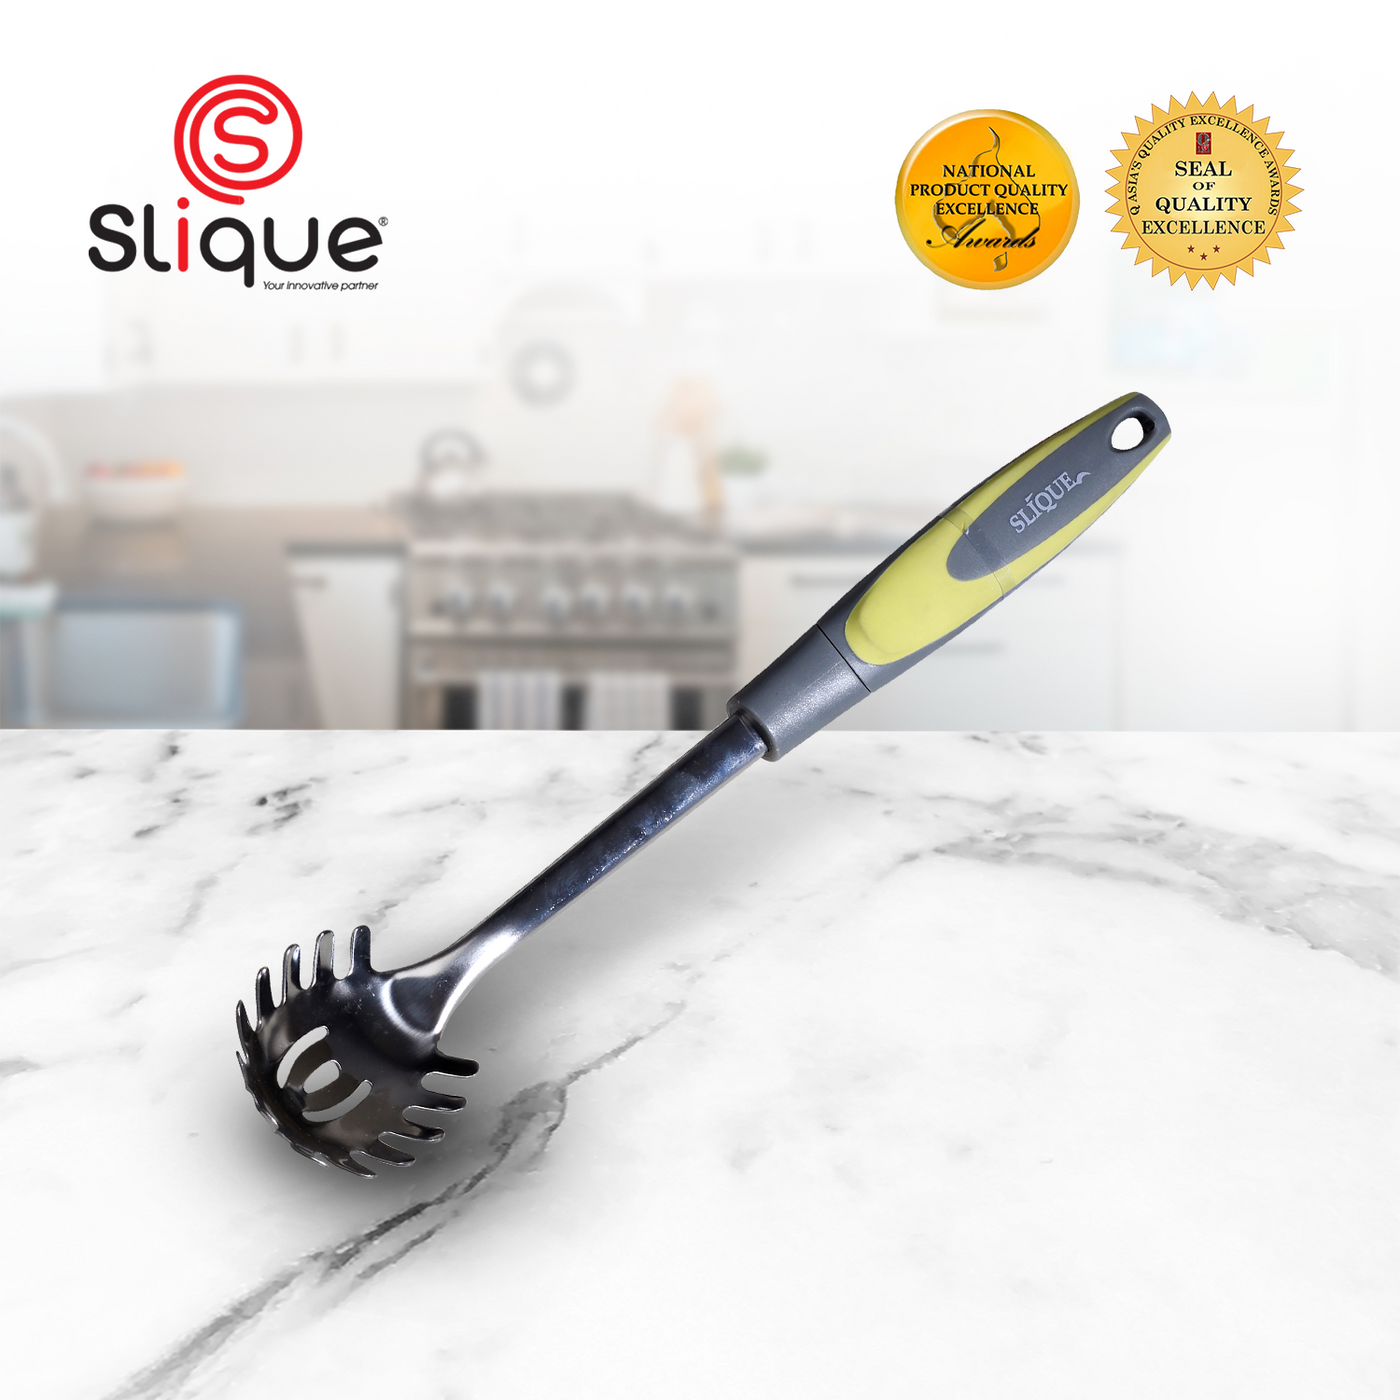 SLIQUE Premium 18/8 Stainless Steel Spaghetti Spoon TPR Silicone Handle Kitchen Essentials Amazing Gift Idea For Any Occasion! (Green)